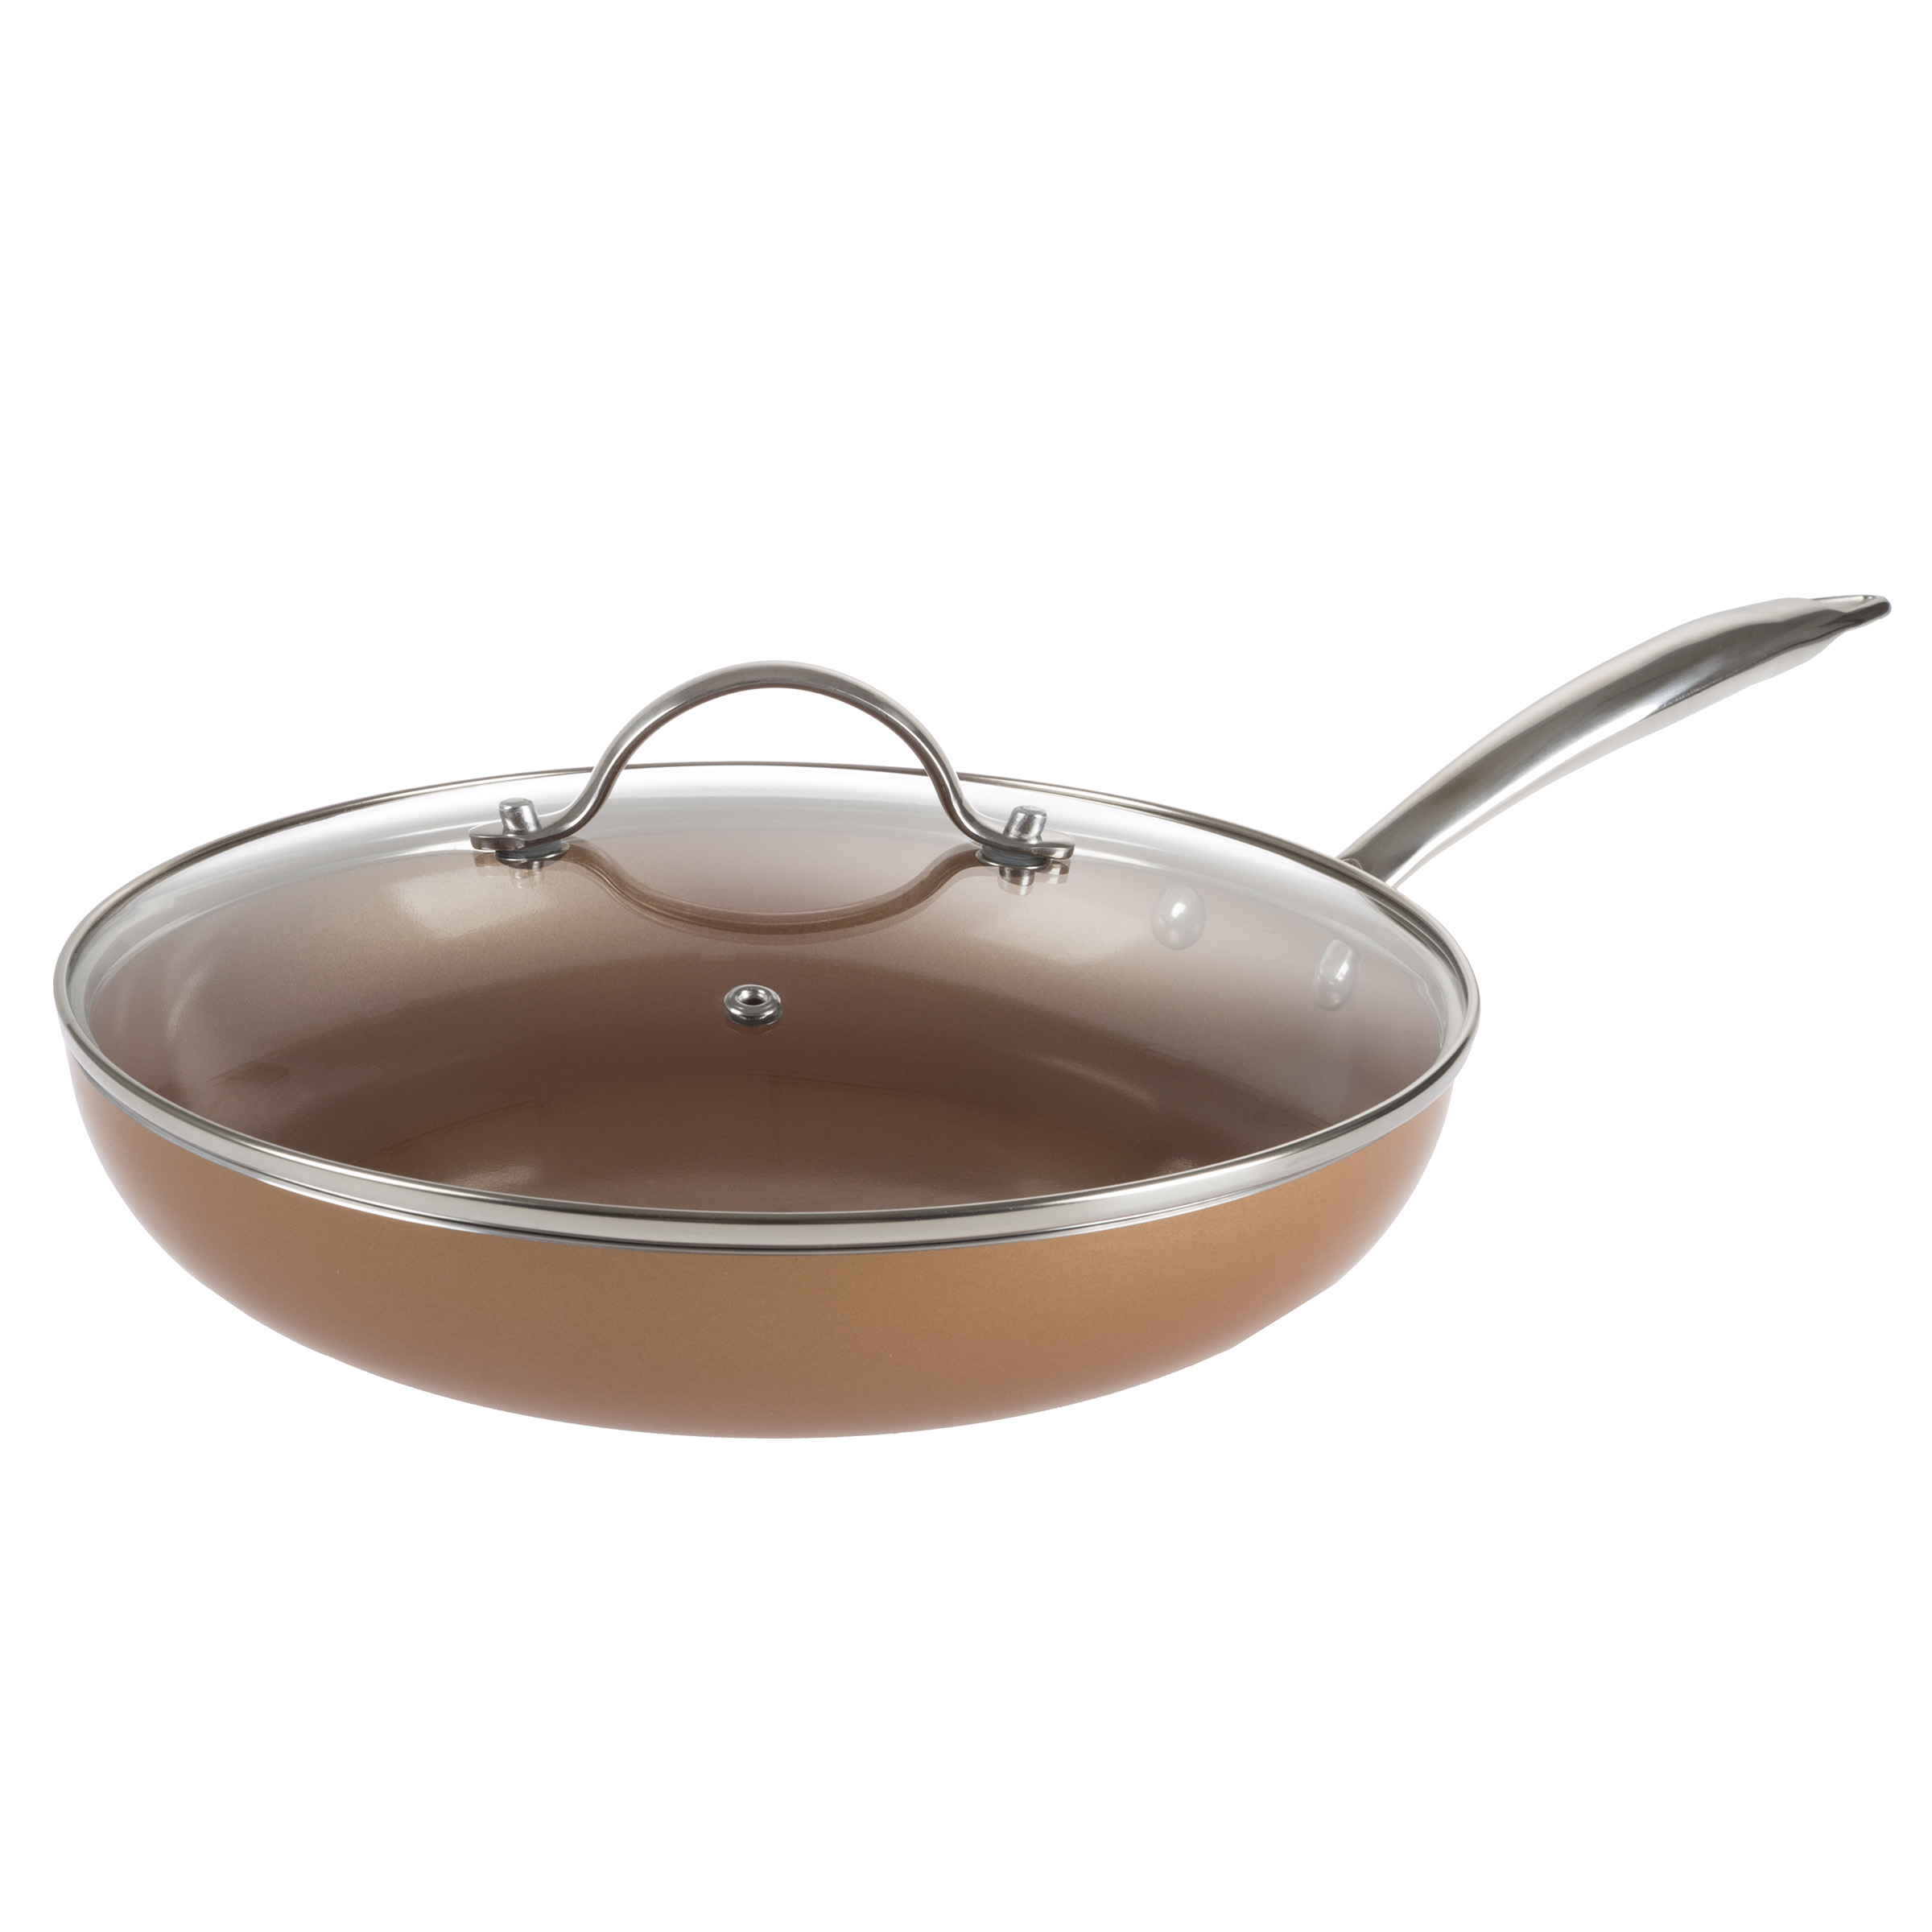 10 Inch Frying Pan with Lid Copper Finish Induction Cooking Stove Top Oven Safe to 500 Degrees